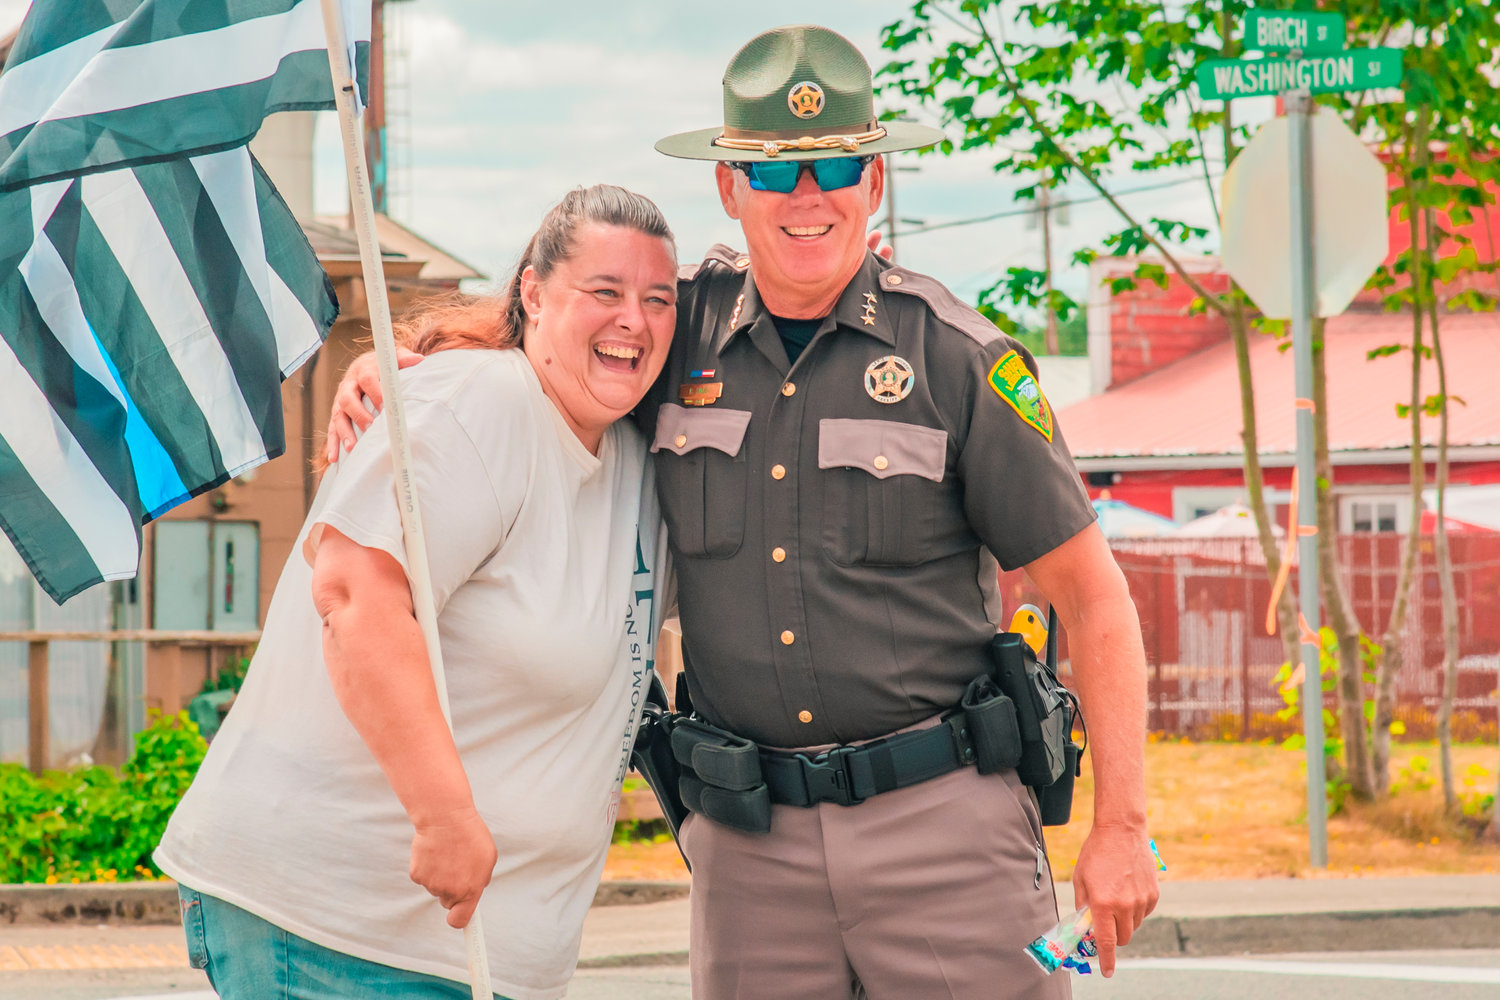 Dawn Miles smiles as she is stopped by Lewis County Sheriff Rob Snaza for a hug while carrying a “Thin Blue Line” flag on Saturday during the Napavine Funtime Festival parade.